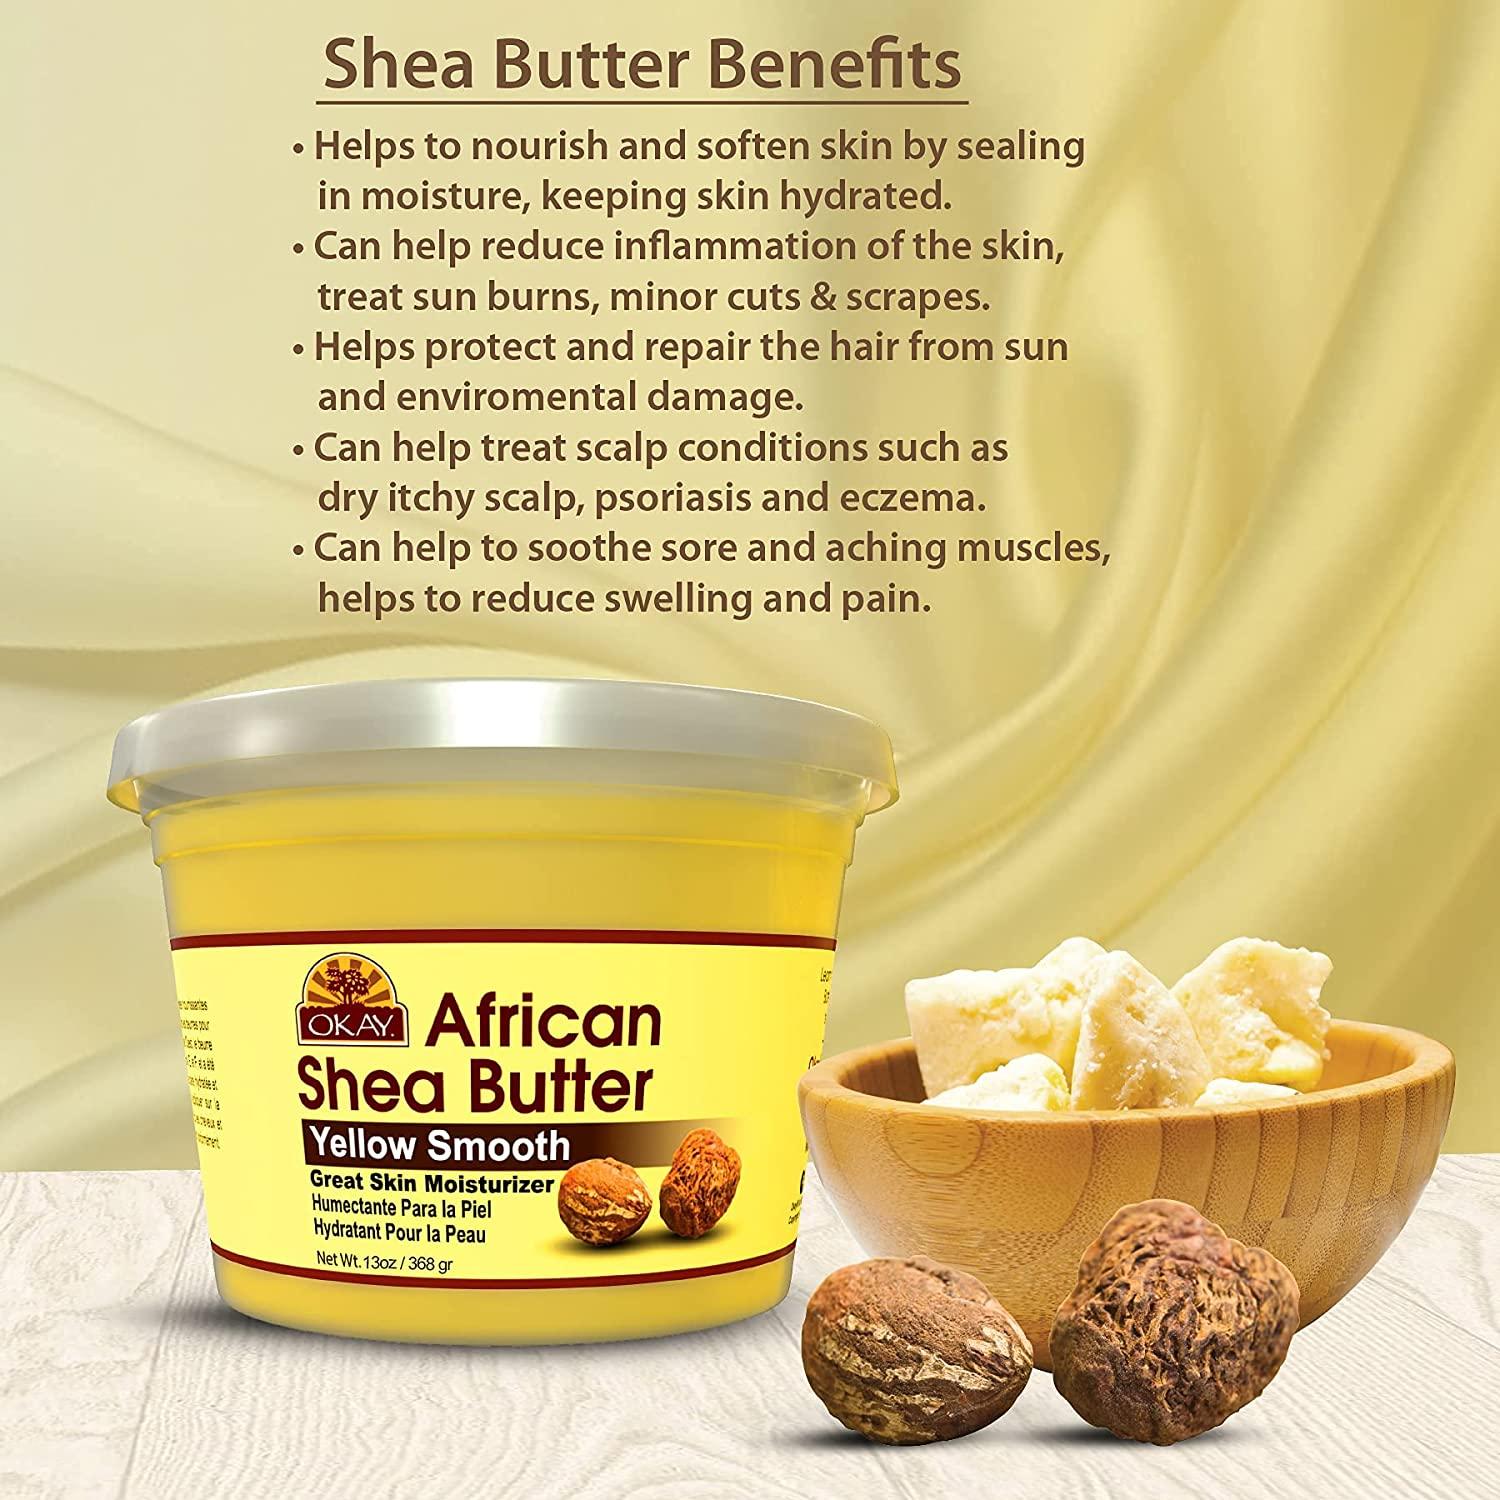 Okay Pure Naturals African Shea Butter Yellow Smooth 13 oz (368 g)